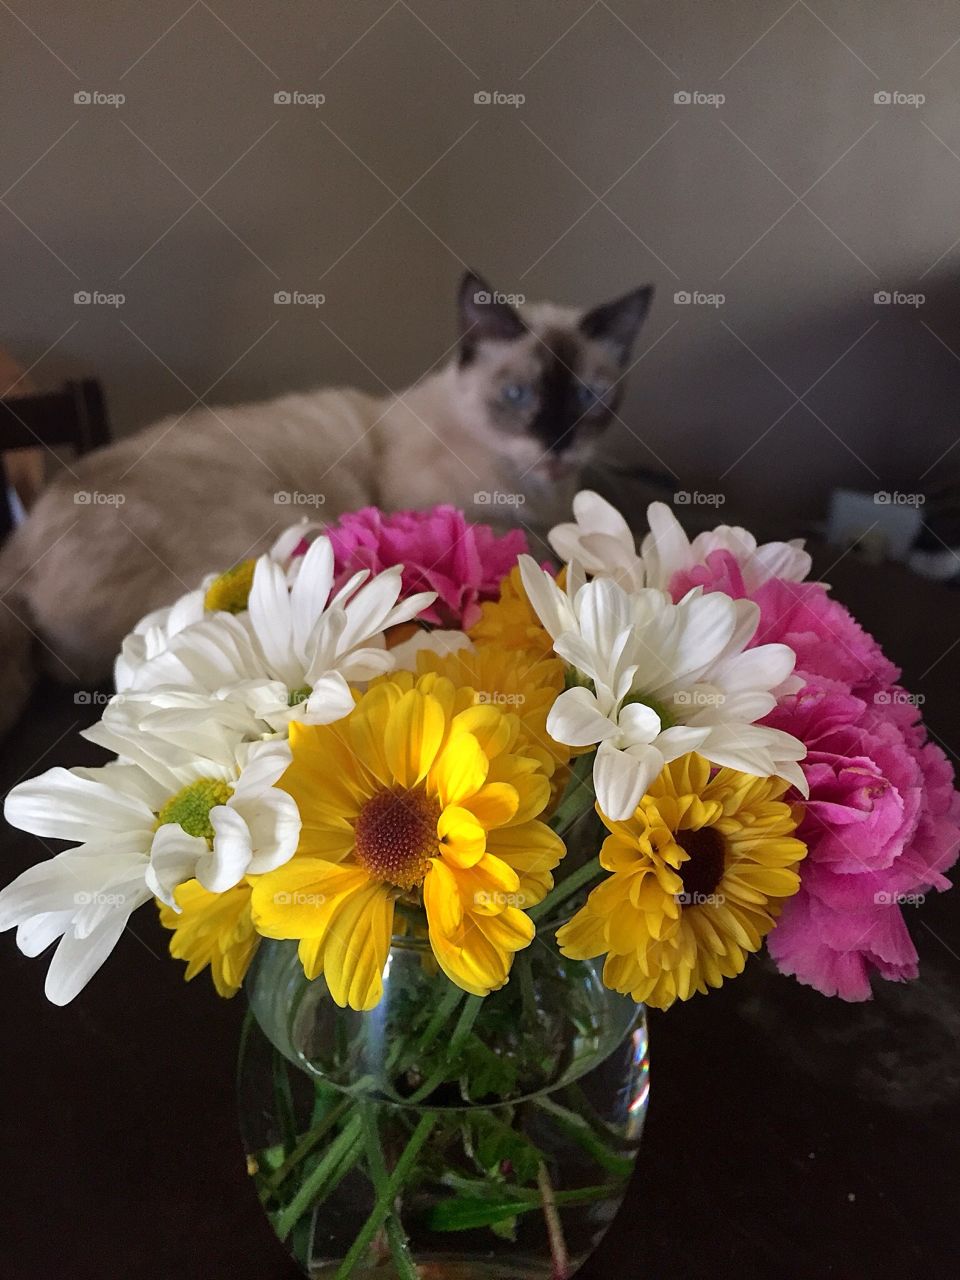 Flowers and cat